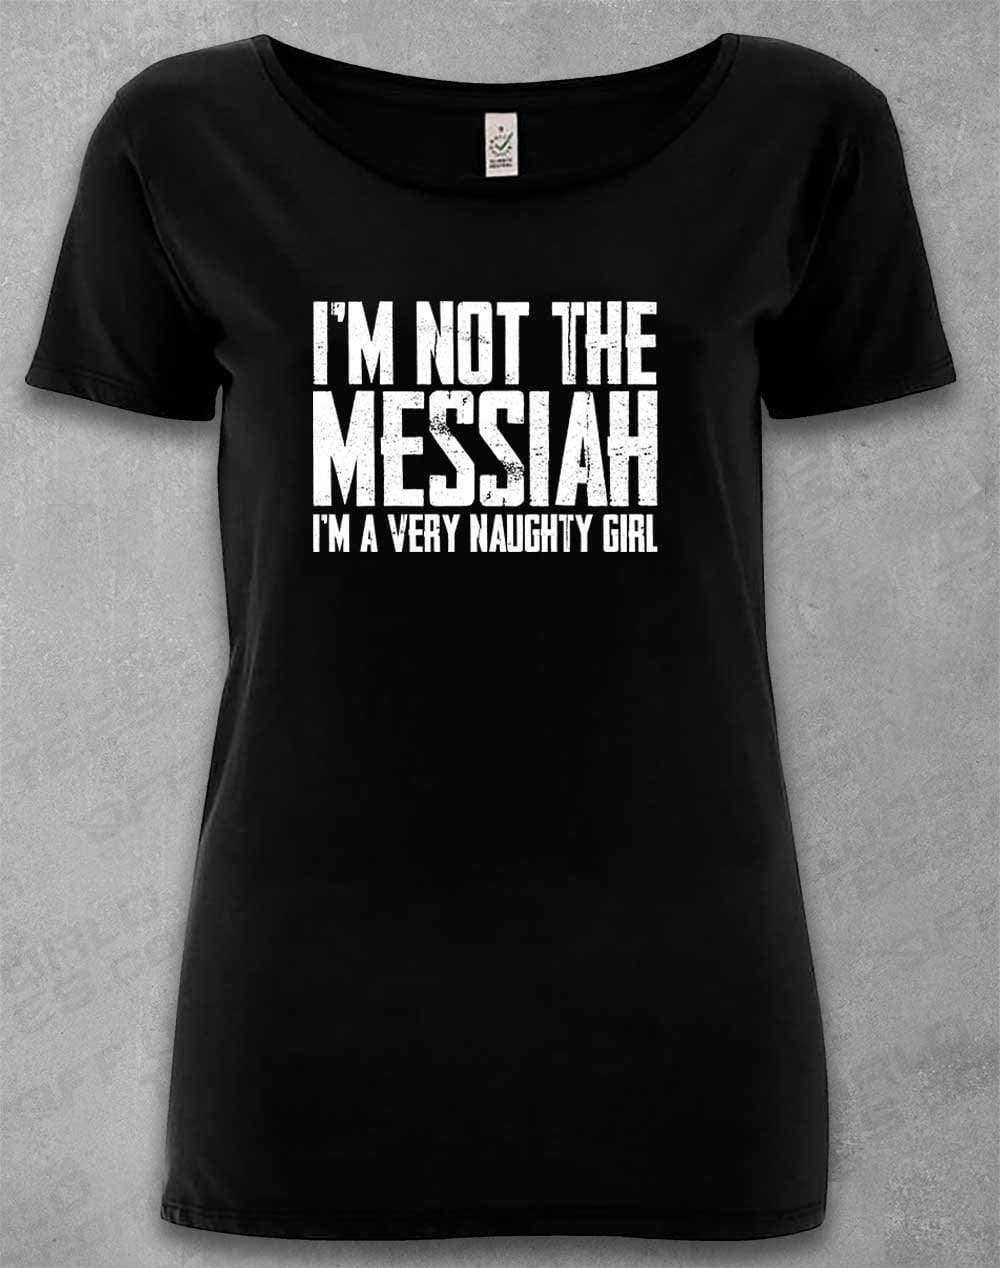 DELUXE I'm Not the Messiah I'm a Very Naughty Girl Organic Scoop Neck T-Shirt 8-10 / Black  - Off World Tees